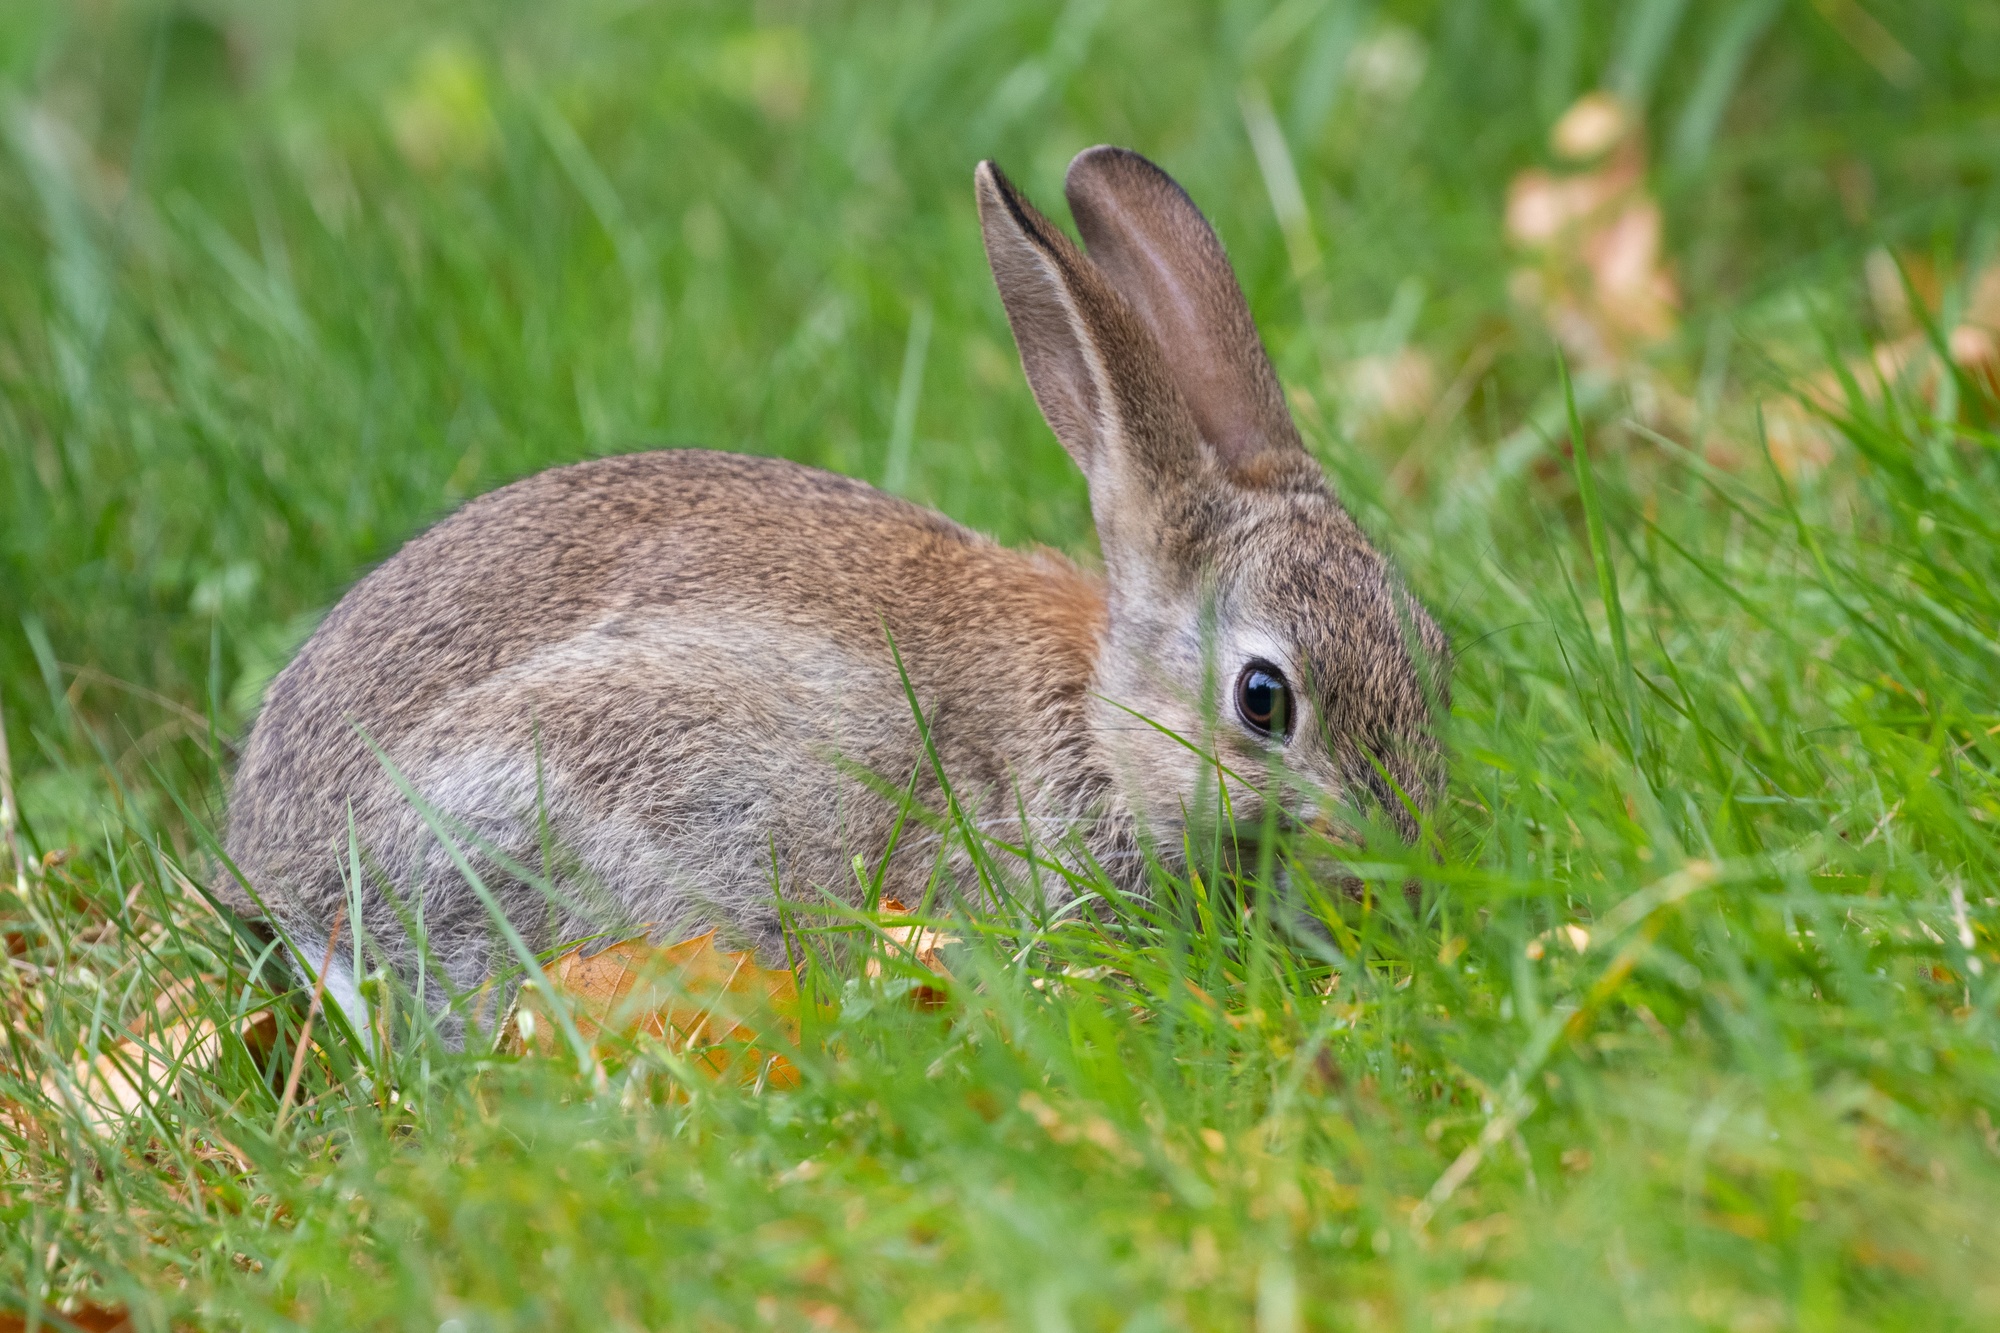 Rabbit sitting site on in grass looking at camera with one eye